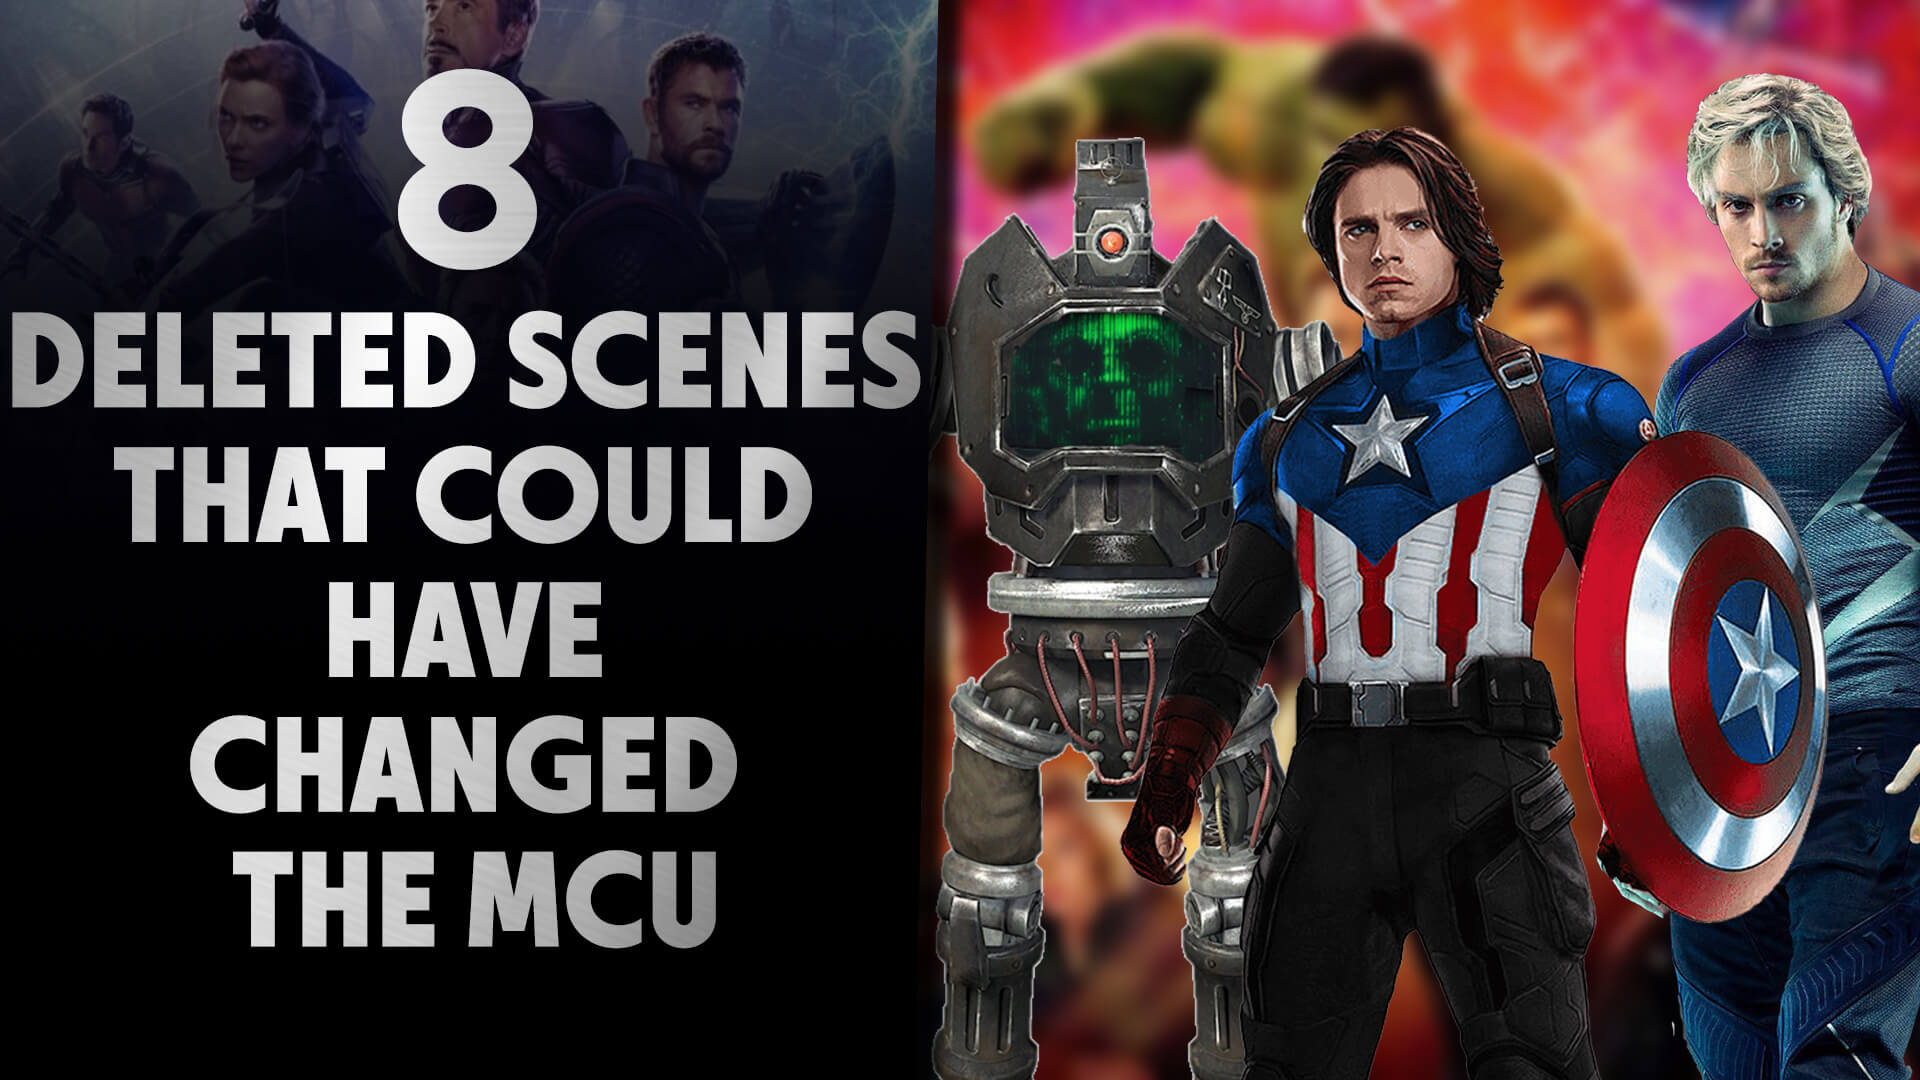 8 Deleted Scenes that could have changed the MCU